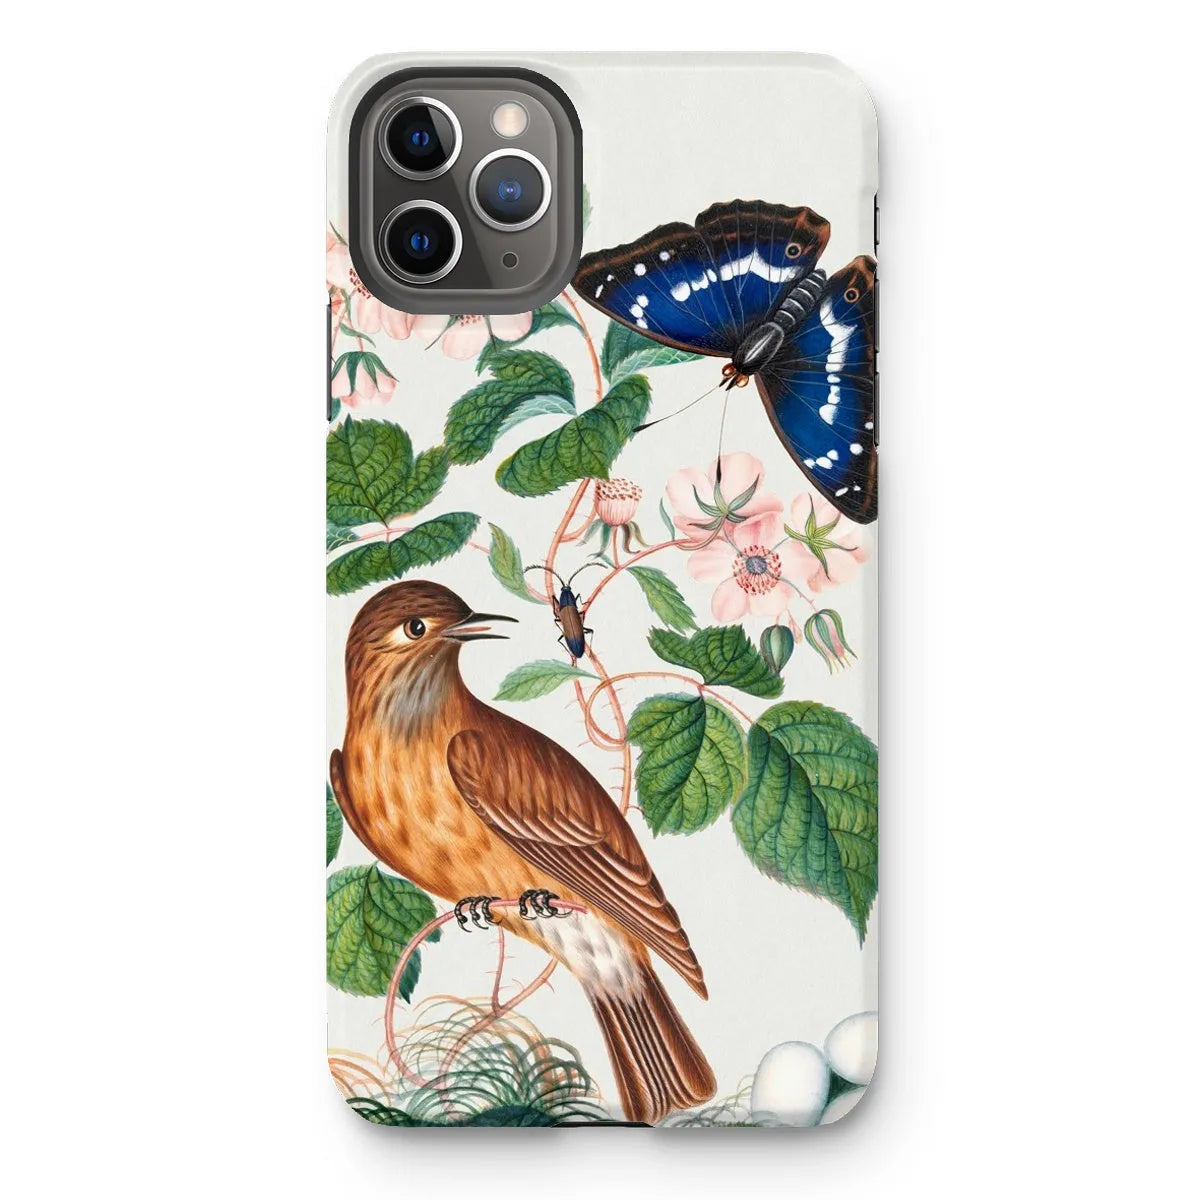 Flycatcher Emperor And Beetle - Art Phone Case - James Bolton - Iphone 11 Pro Max / Matte - Mobile Phone Cases